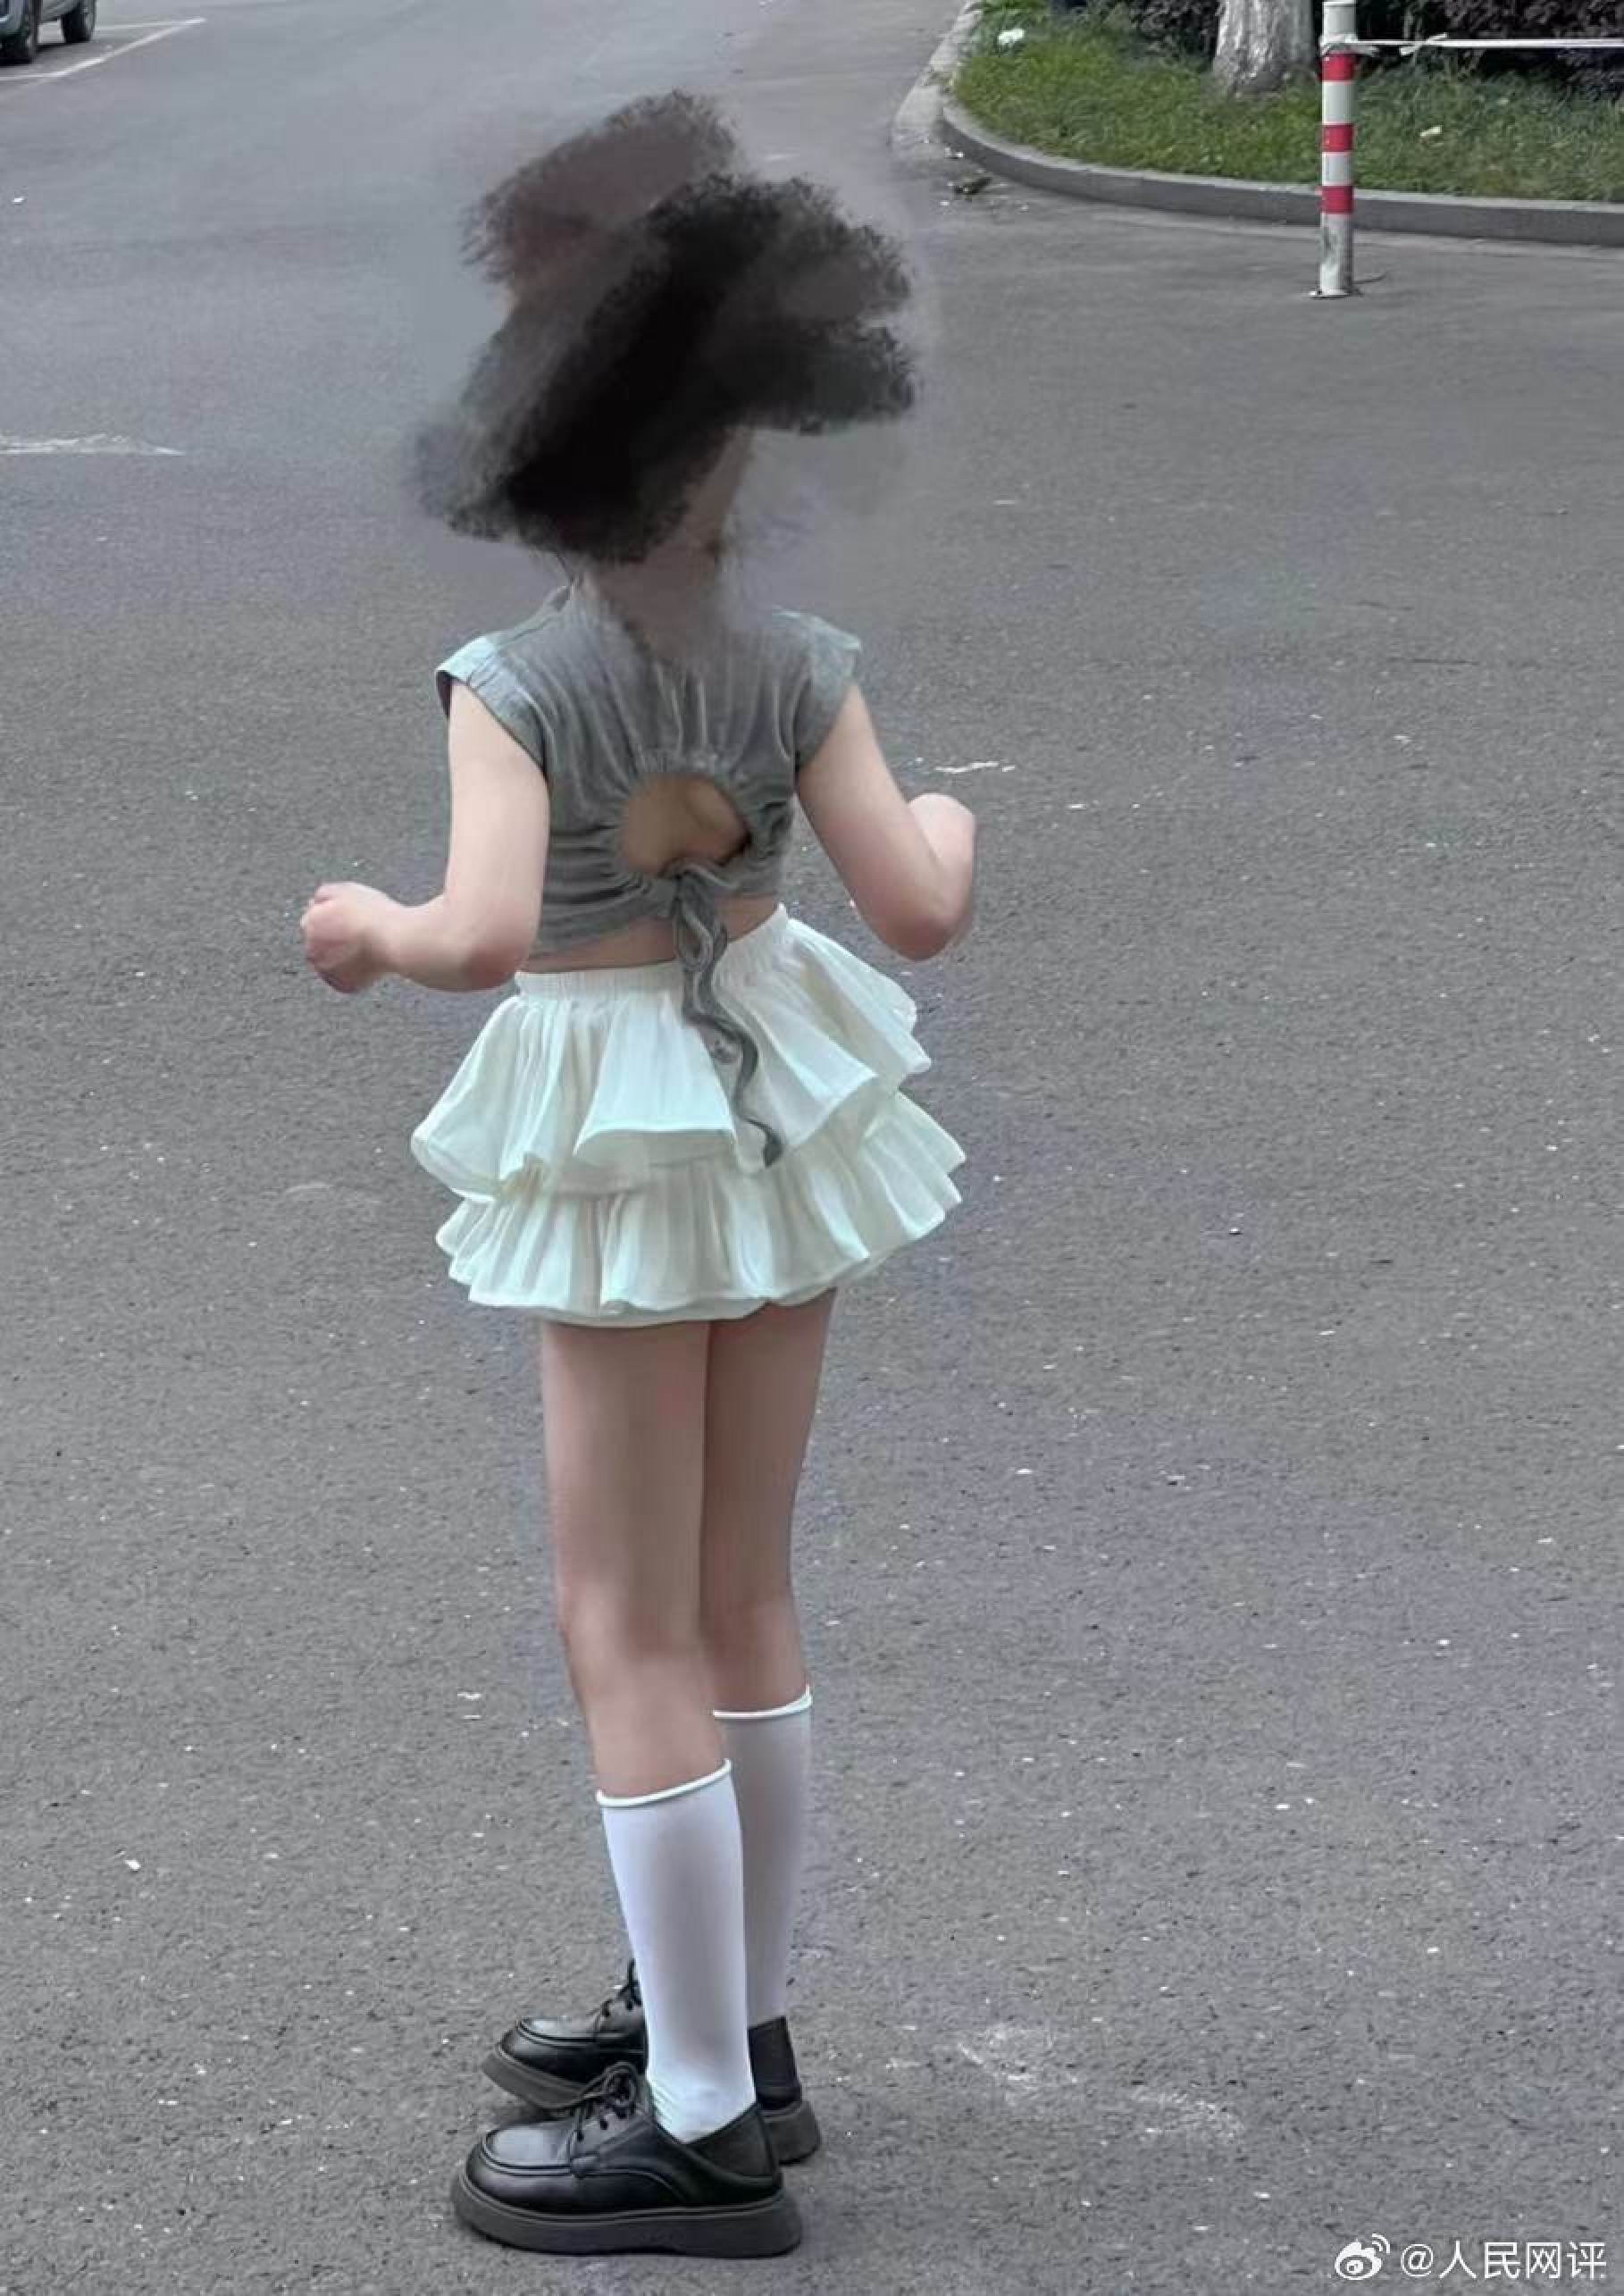 Tiny Teen Girl - Baby spicy style' fashion that parades little girls in tight skirts and  low-cut dresses slammed by Chinese state media, derided as 'pornography' |  South China Morning Post